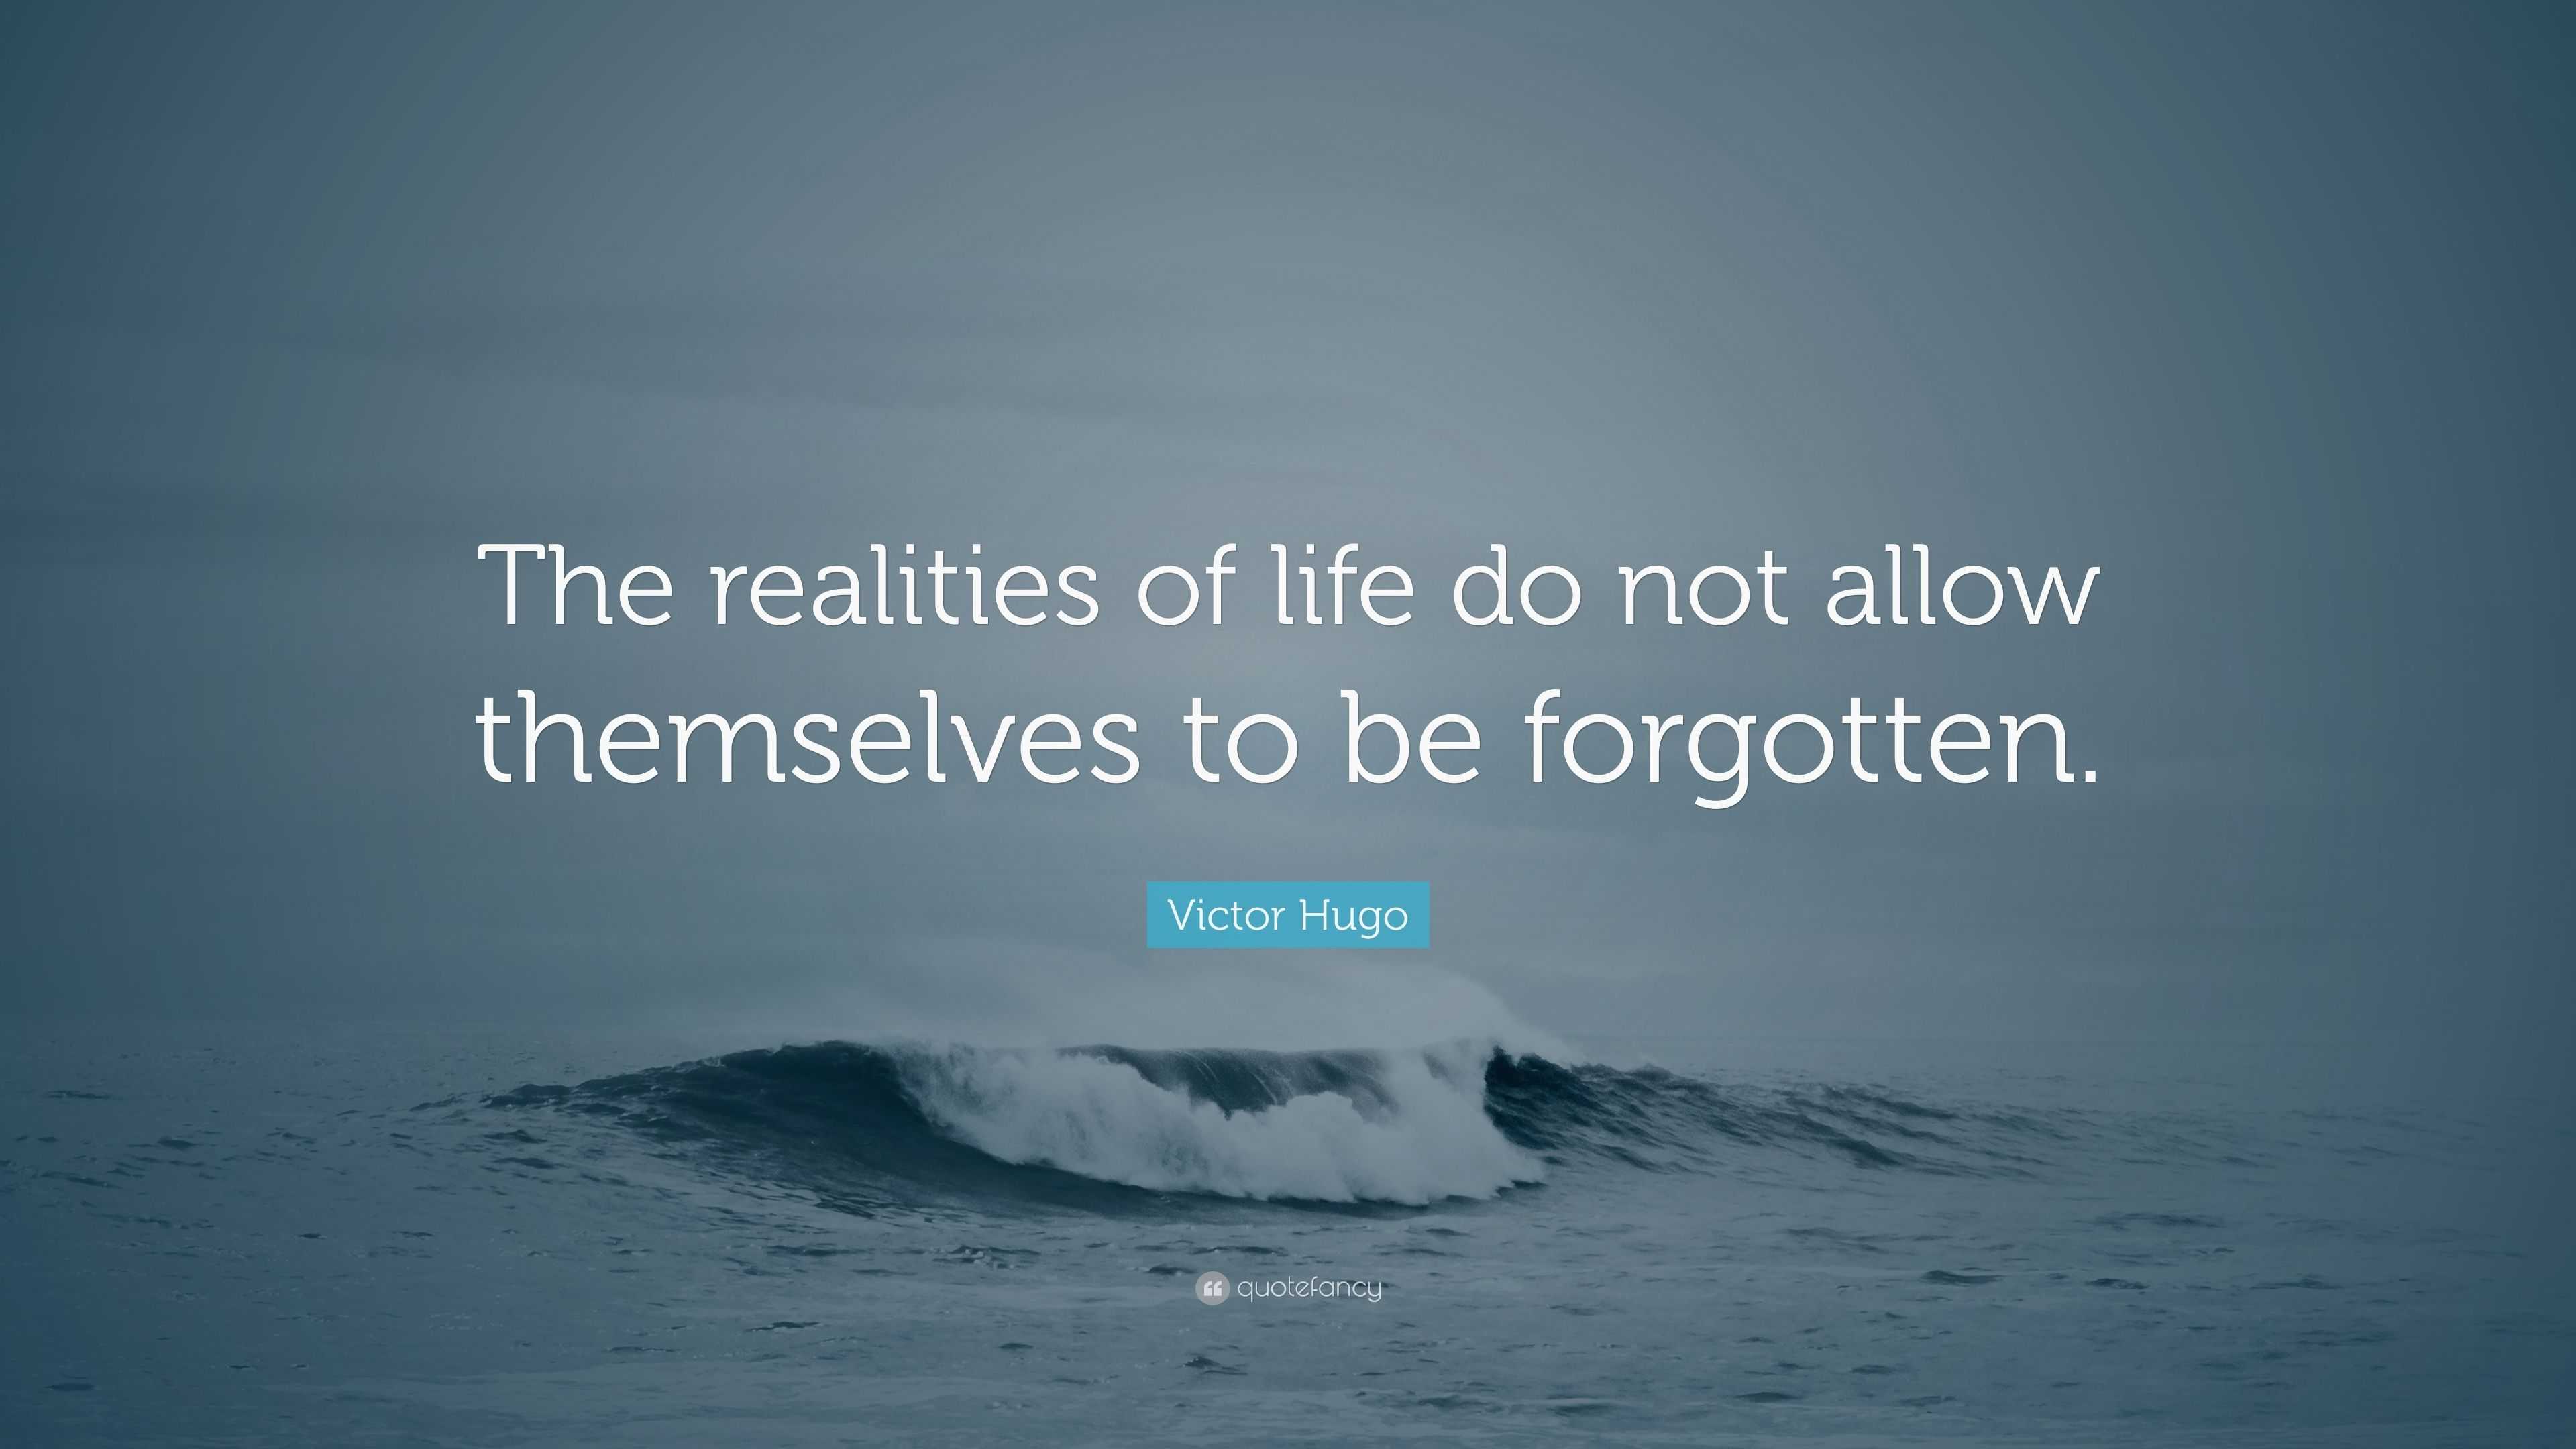 Victor Hugo Quote: “The realities of life do not allow themselves to be ...